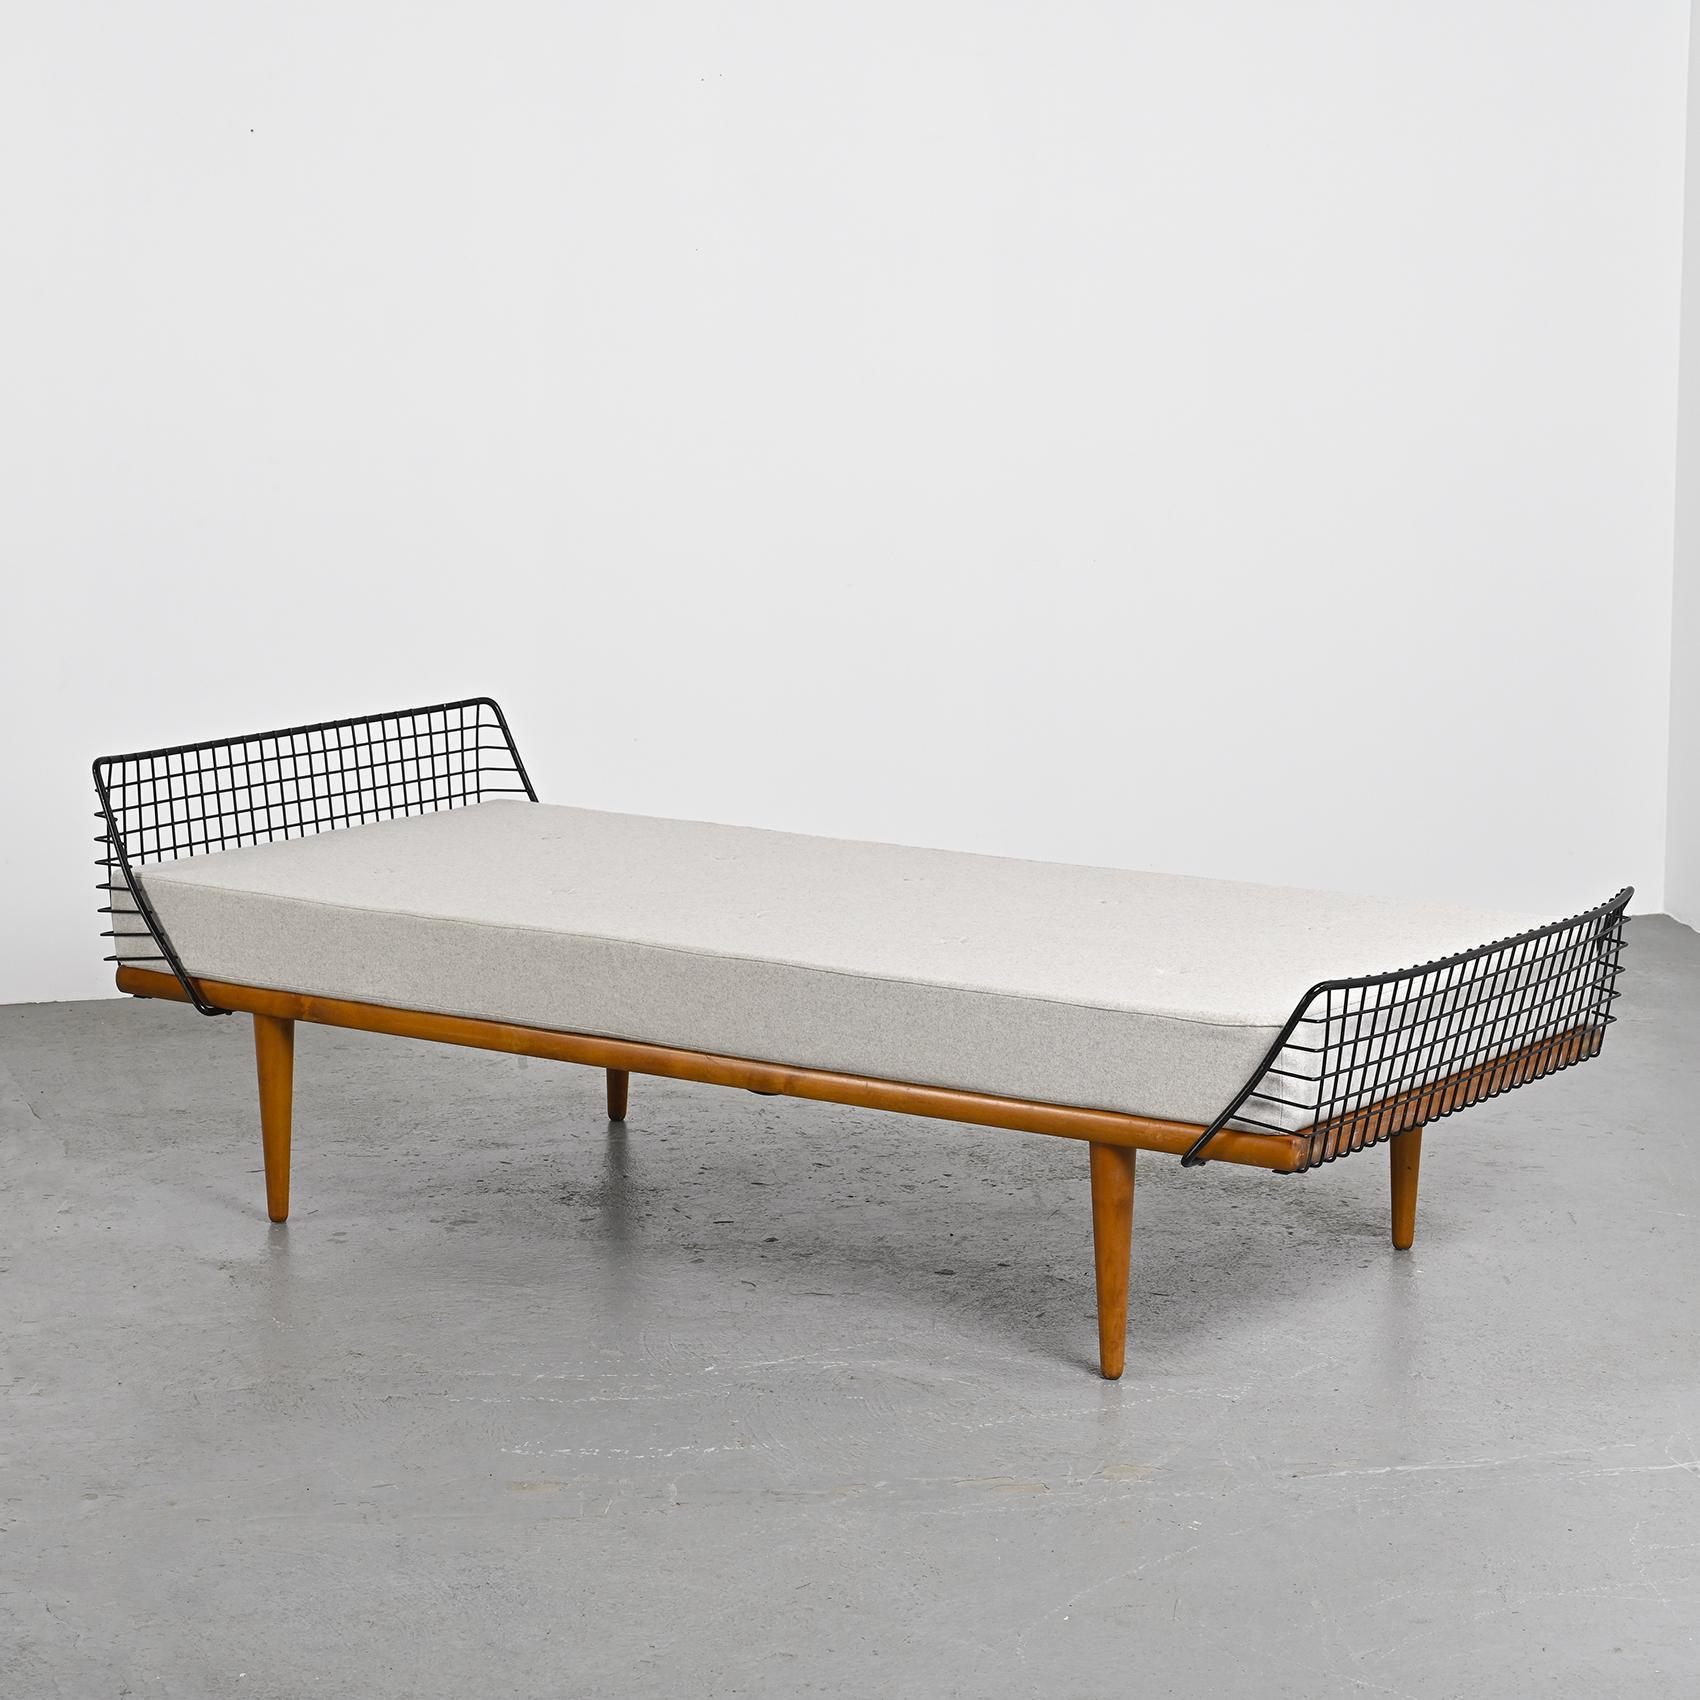 Modernist daybed envisioned by Swedish designer Bengt Ruda in the 1960s, epitomizing the distinctive design of its era.

Crafted with a teak frame supported by four gracefully tapered legs, the head and footboard showcase a crisscross pattern in